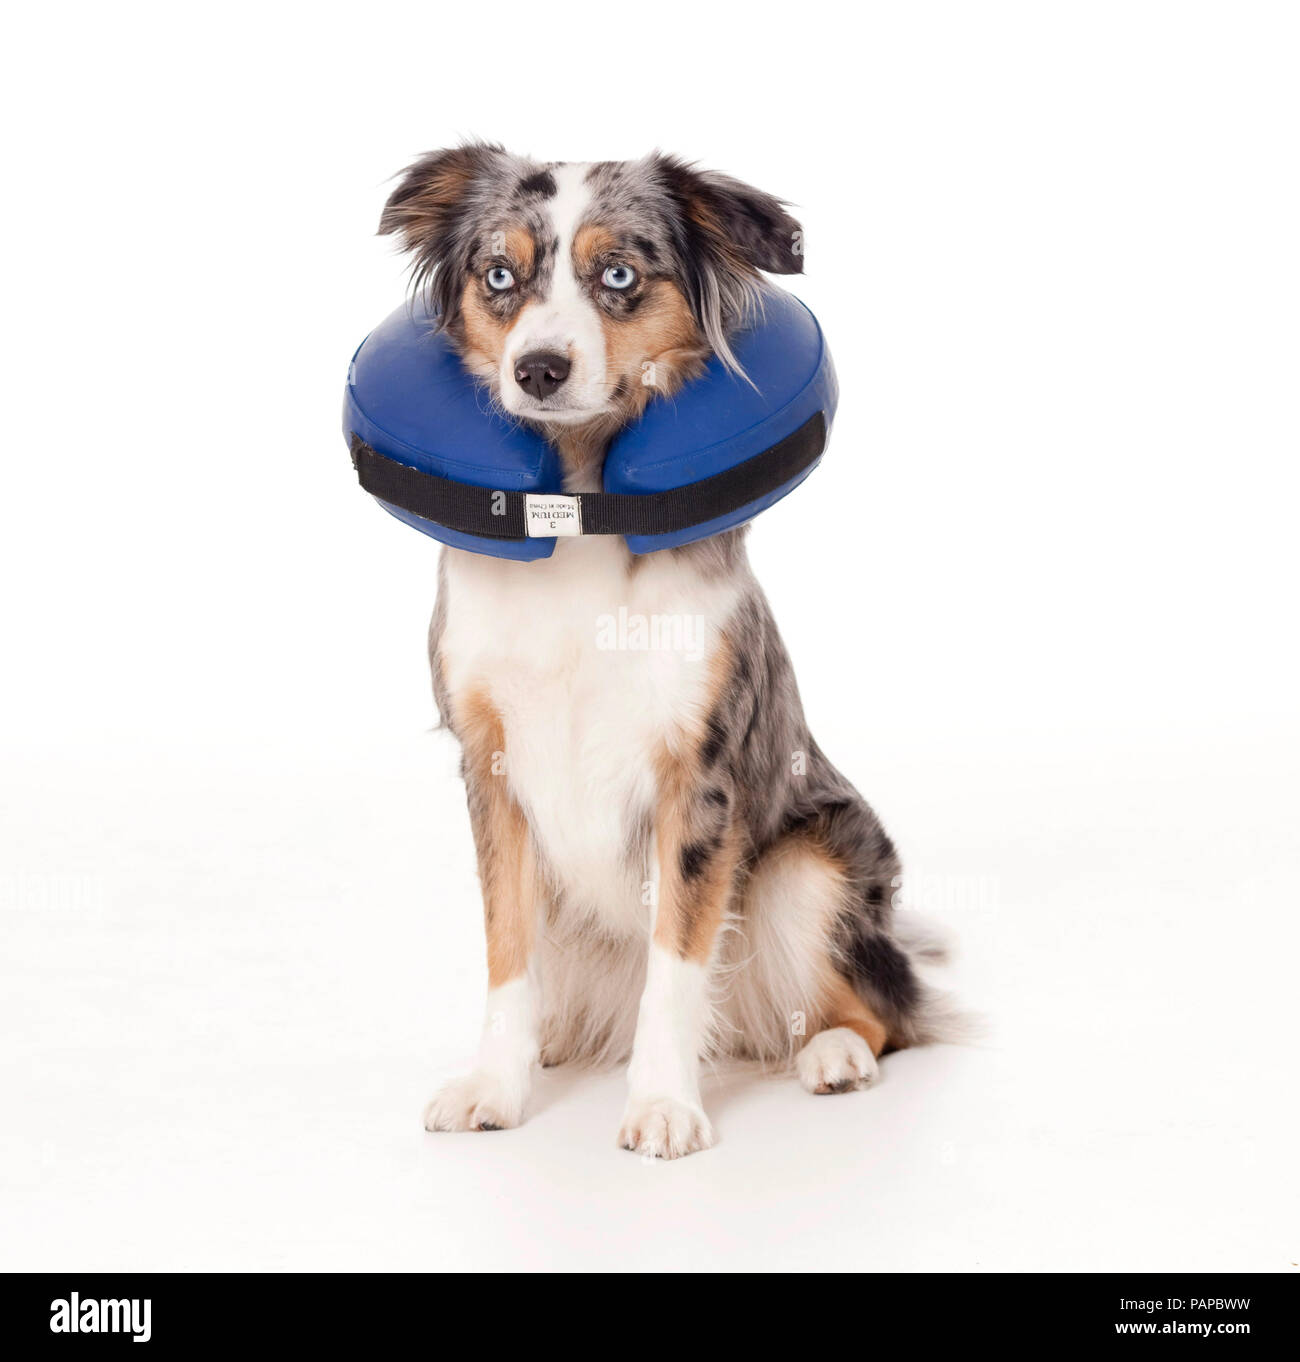 Mini Australian Shepherd wearing an Elizabethan collar to prevent the animal from licking or biting during healing of wounds. Germany. Studio picture against a white background. Stock Photo